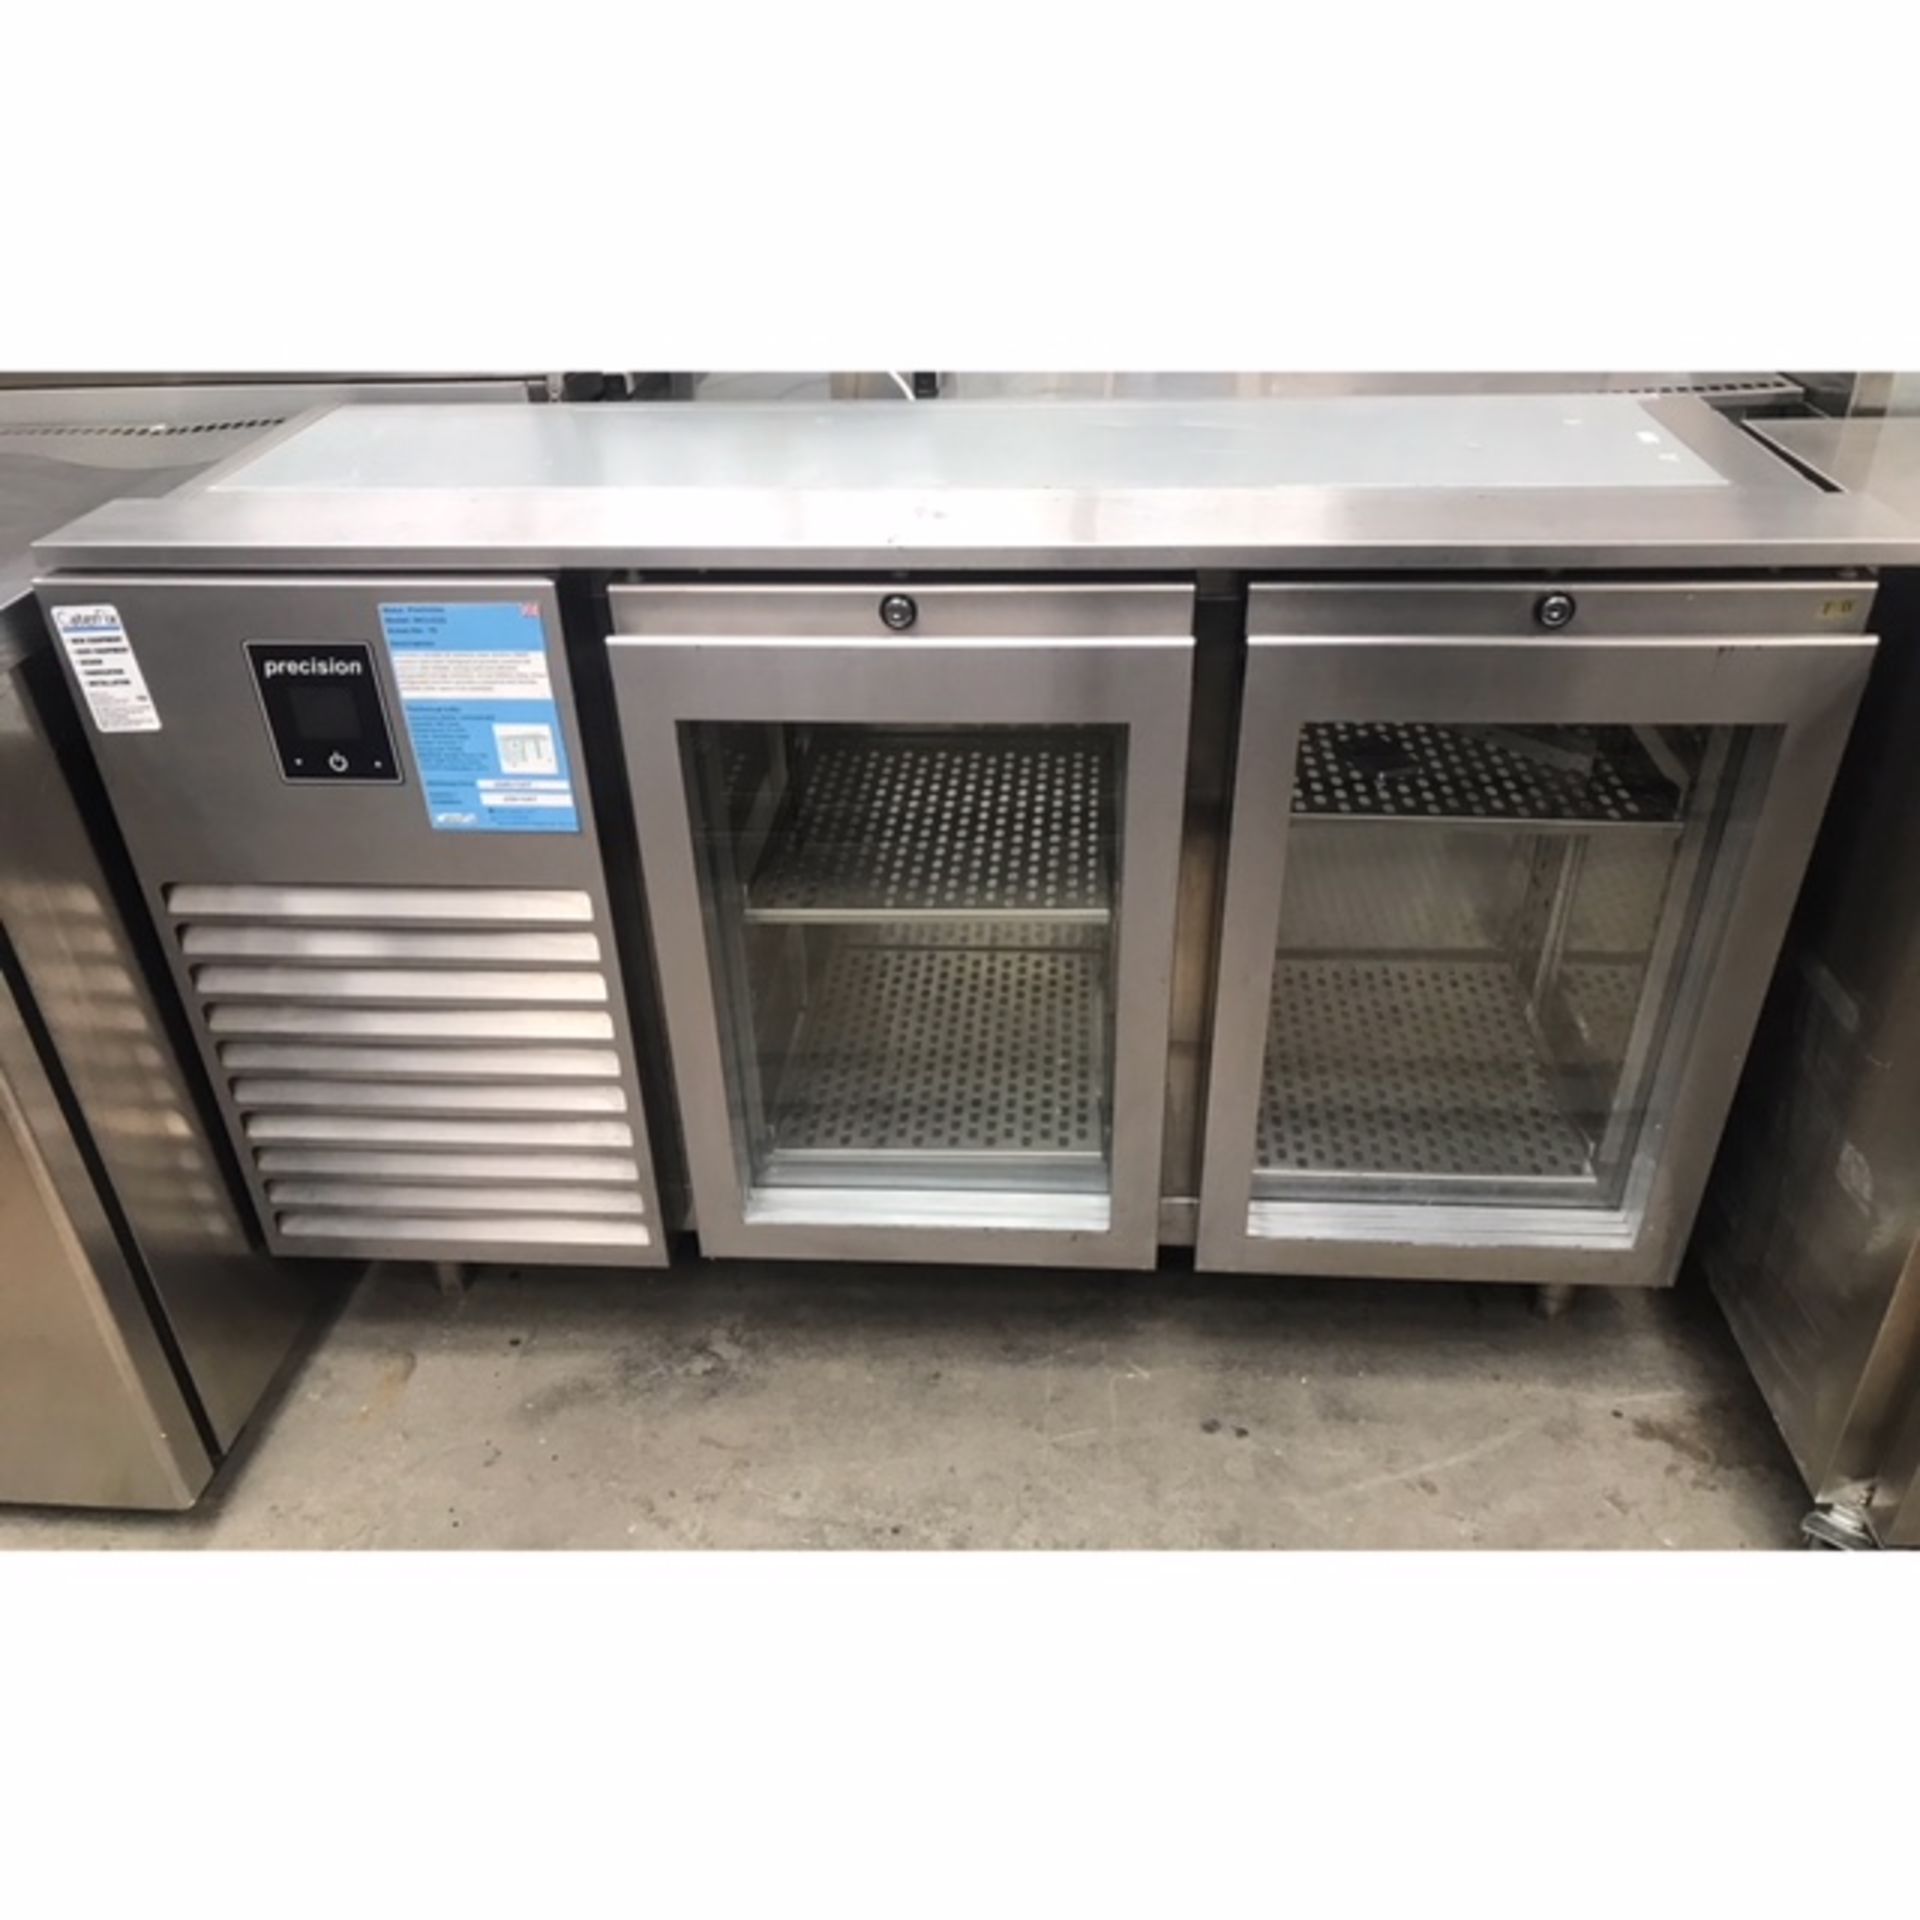 Precision MCU223 2 door chiller counter with gantry Precision’s durable all stainless steel slimline - Image 4 of 4